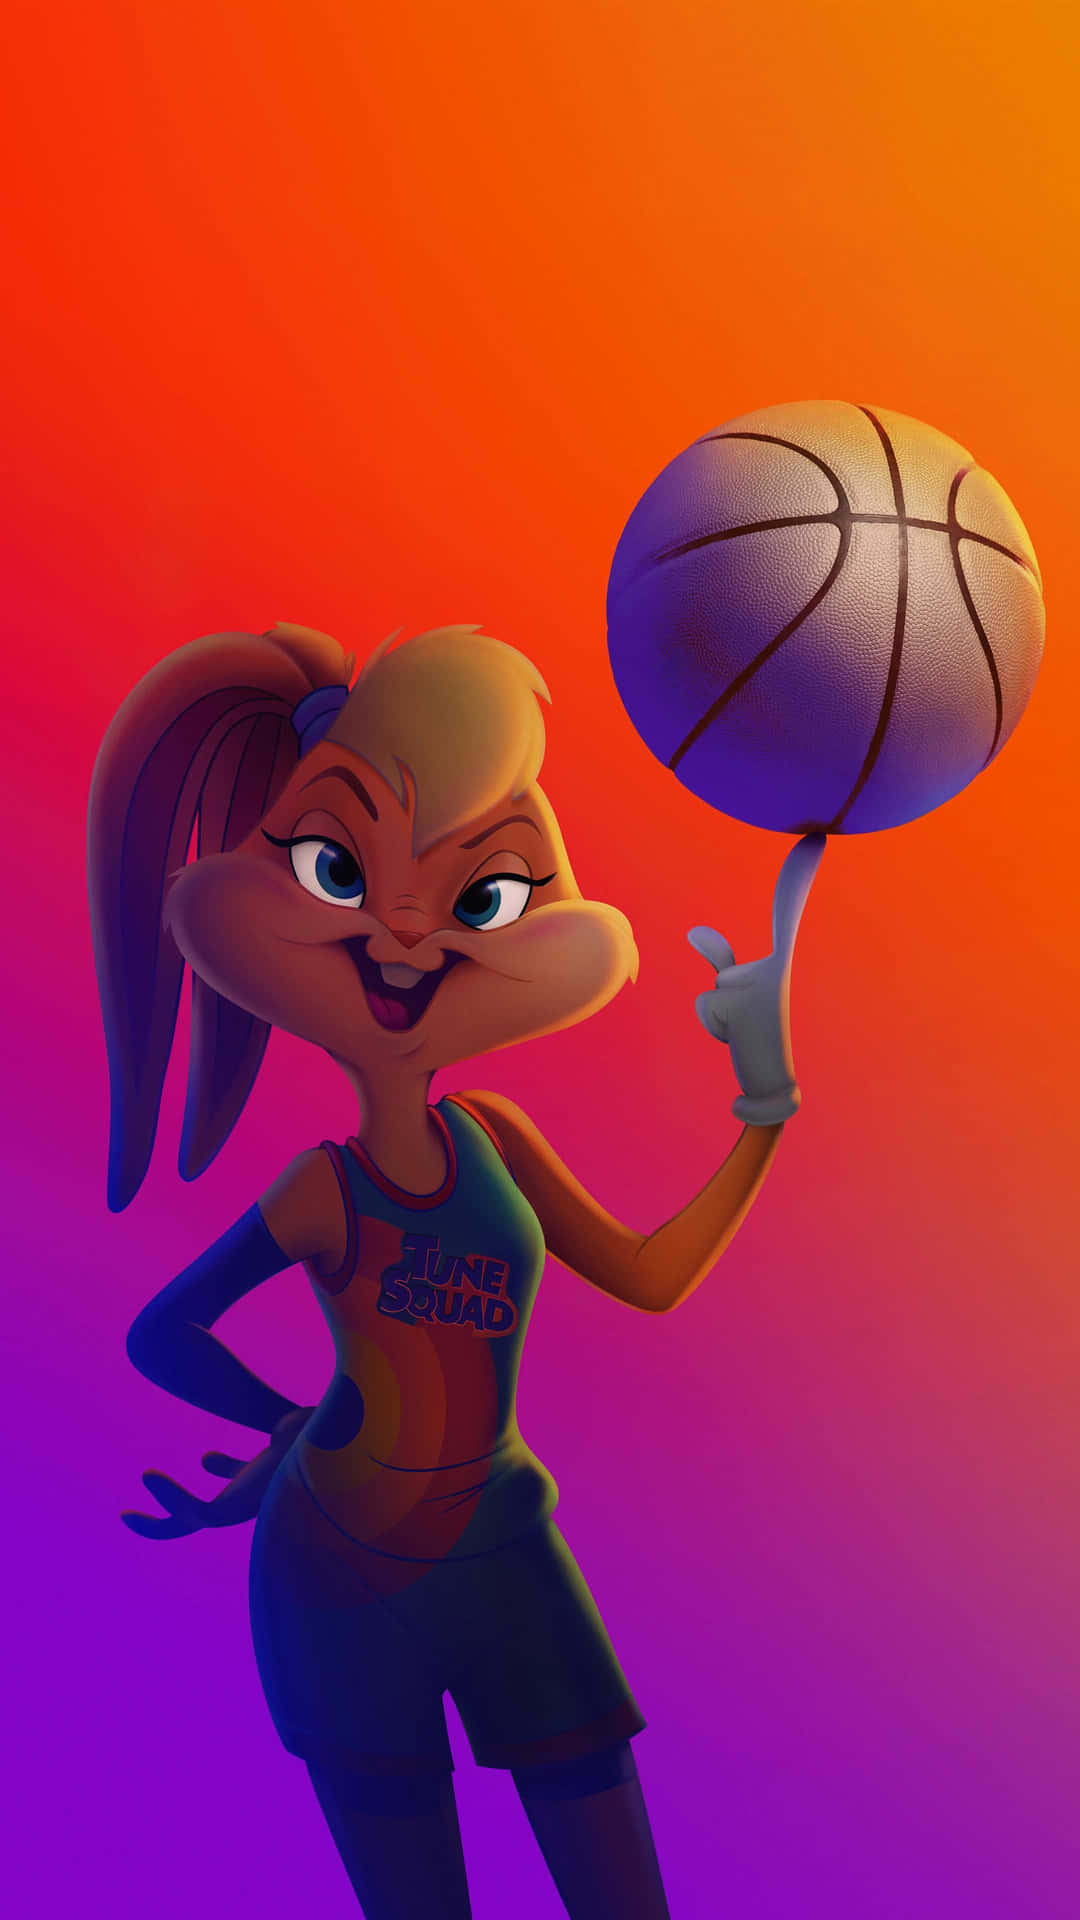 Download Cool Space Jam Lola Bunny Spinning Ball Wallpaper